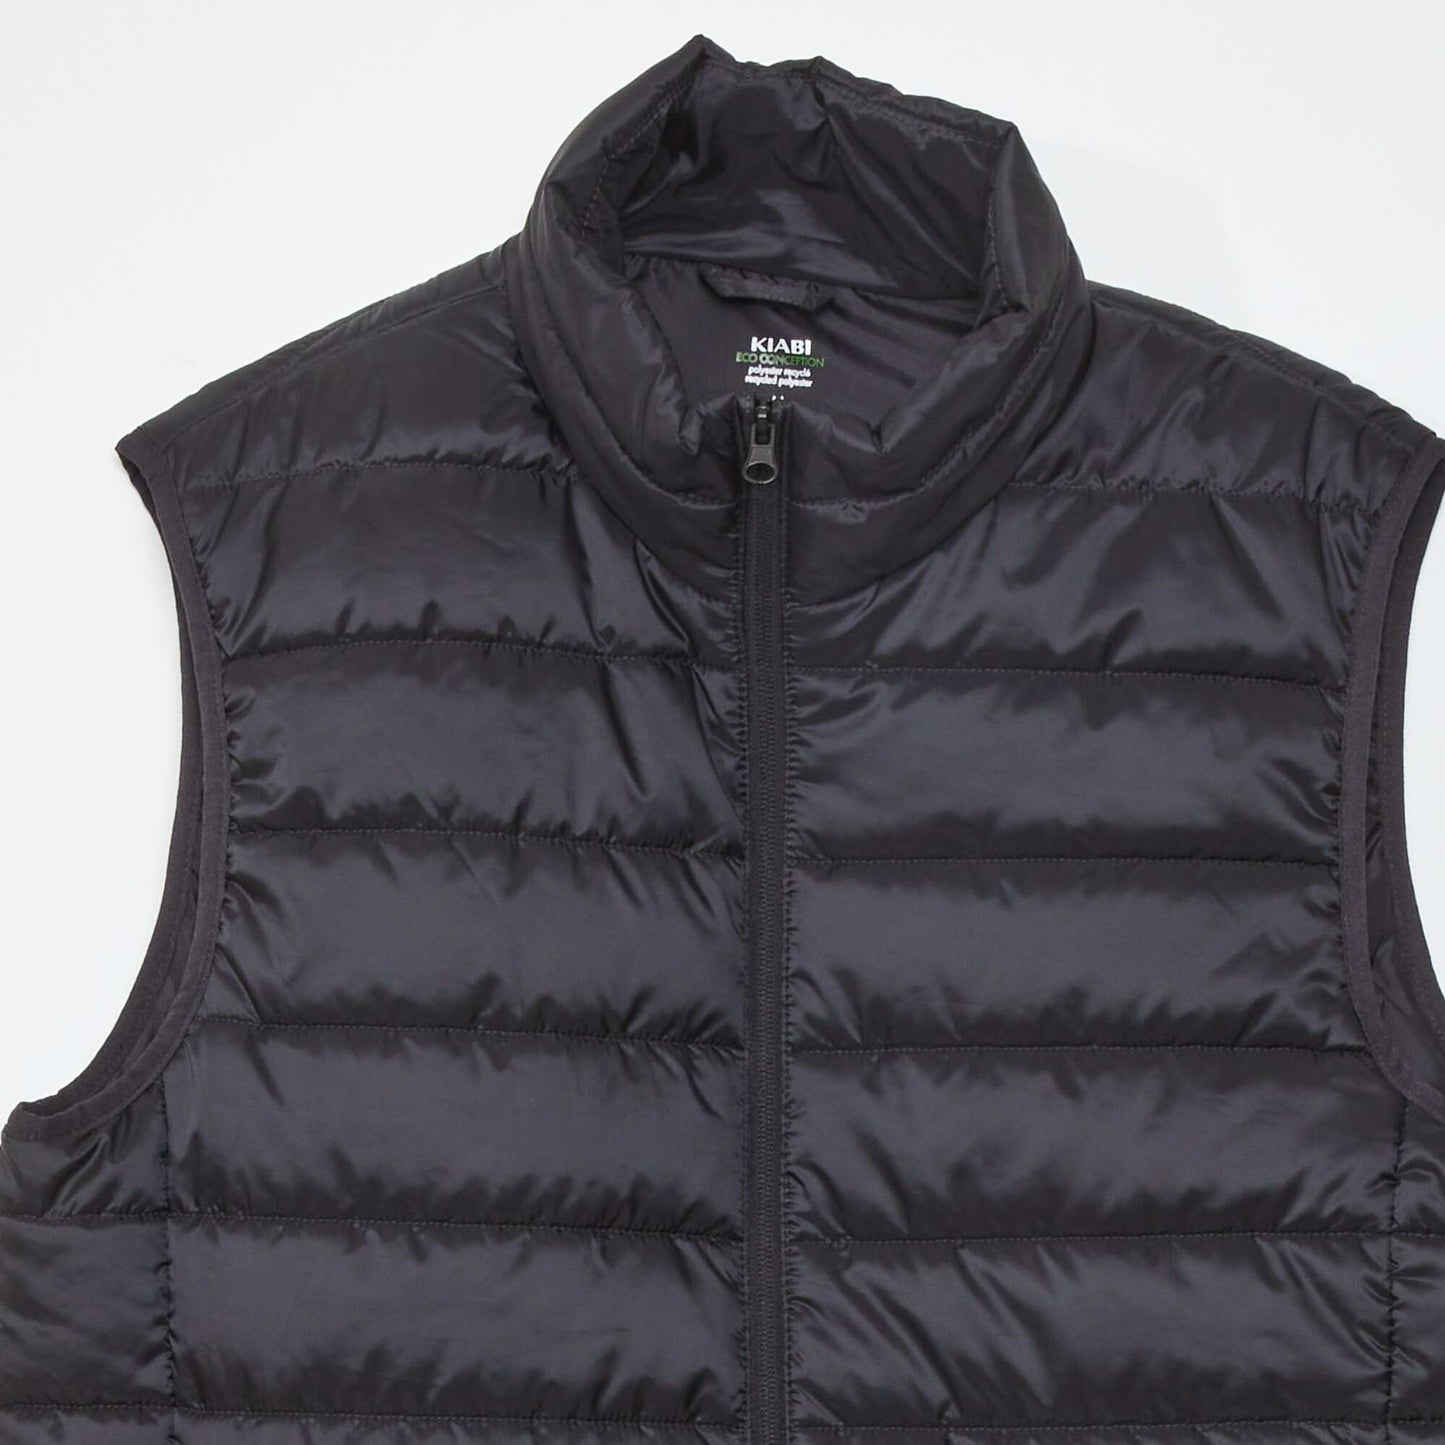 Padded jacket made from recycled bottles black